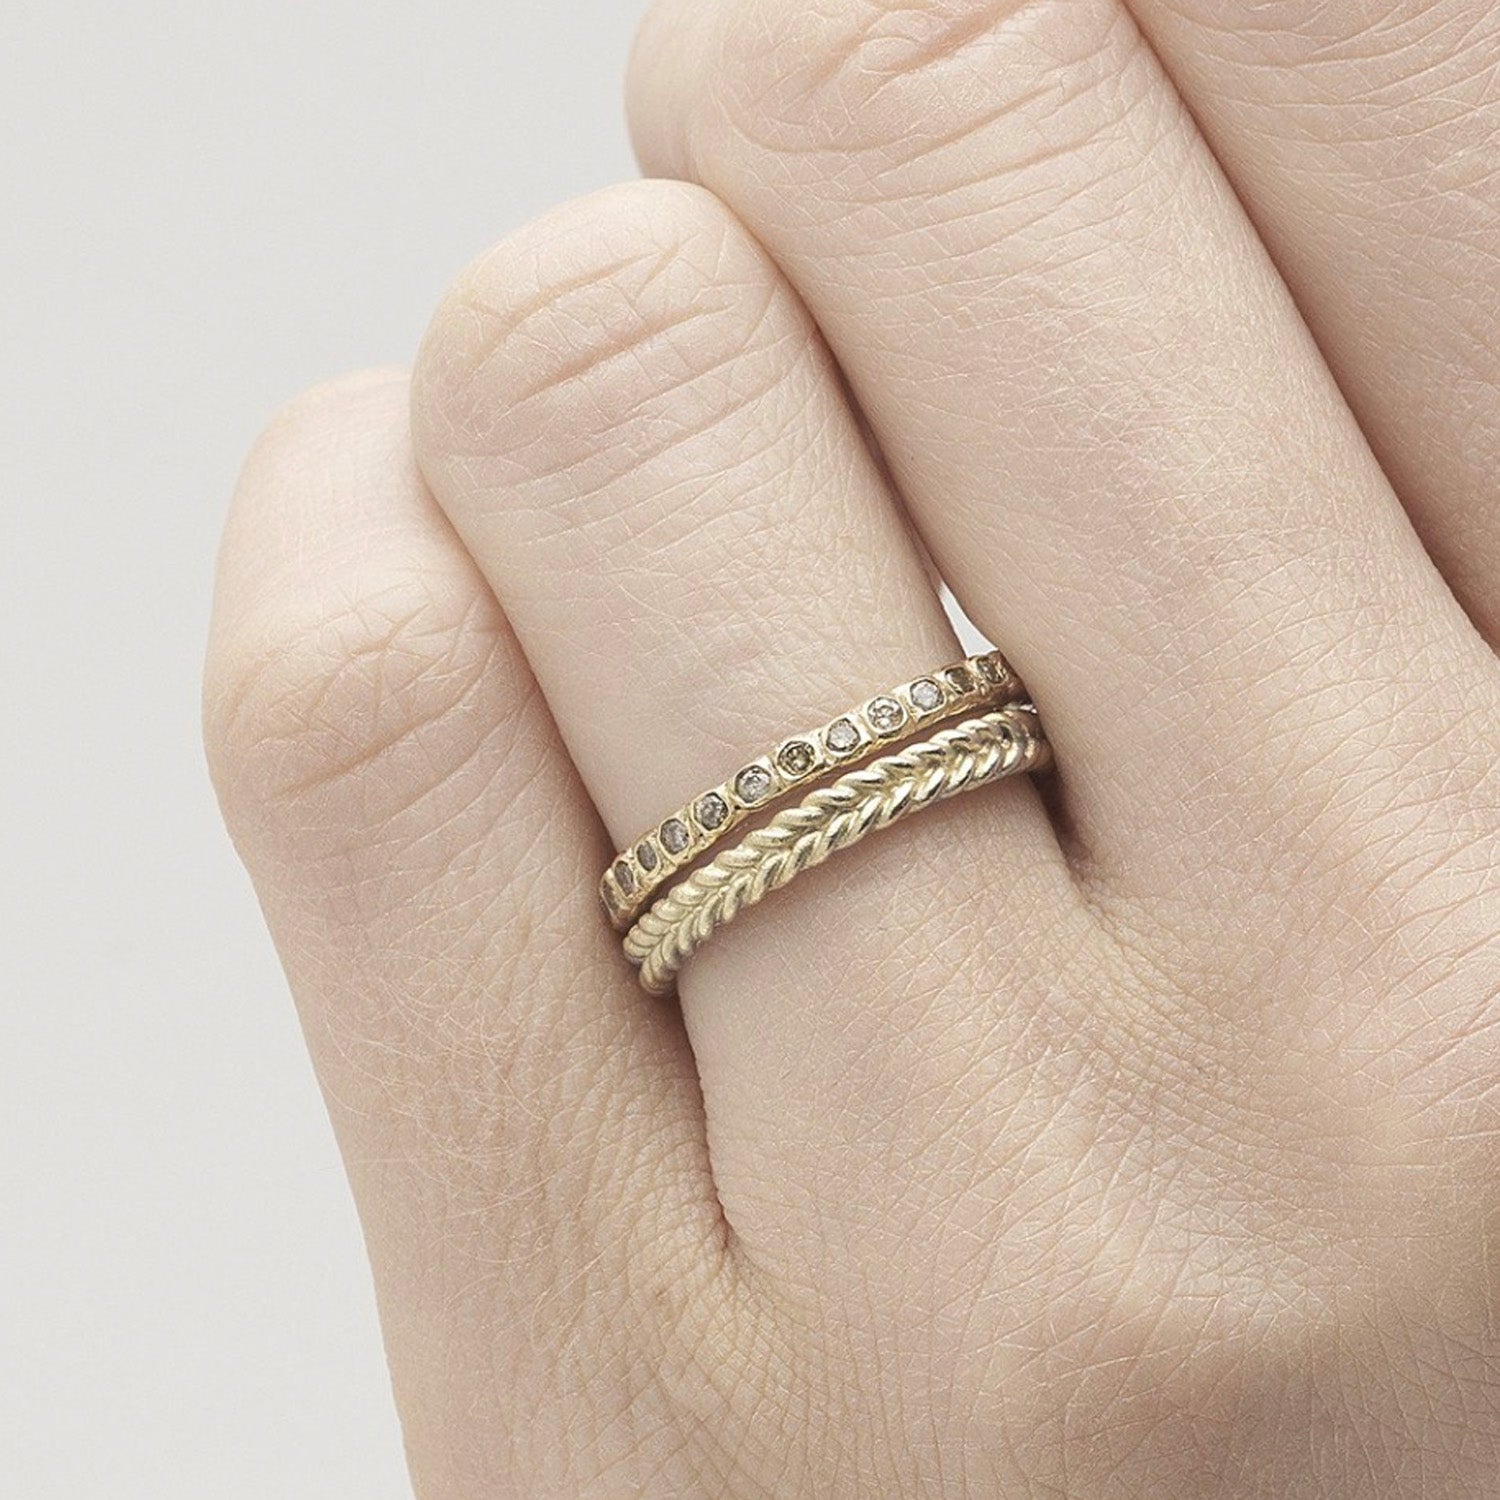 14ct yellow gold Ruth Tomlinson Champagne Diamond eternity band. Organic eternity band worn as a stack with a plaited band on a women finger. Organic diamond ring